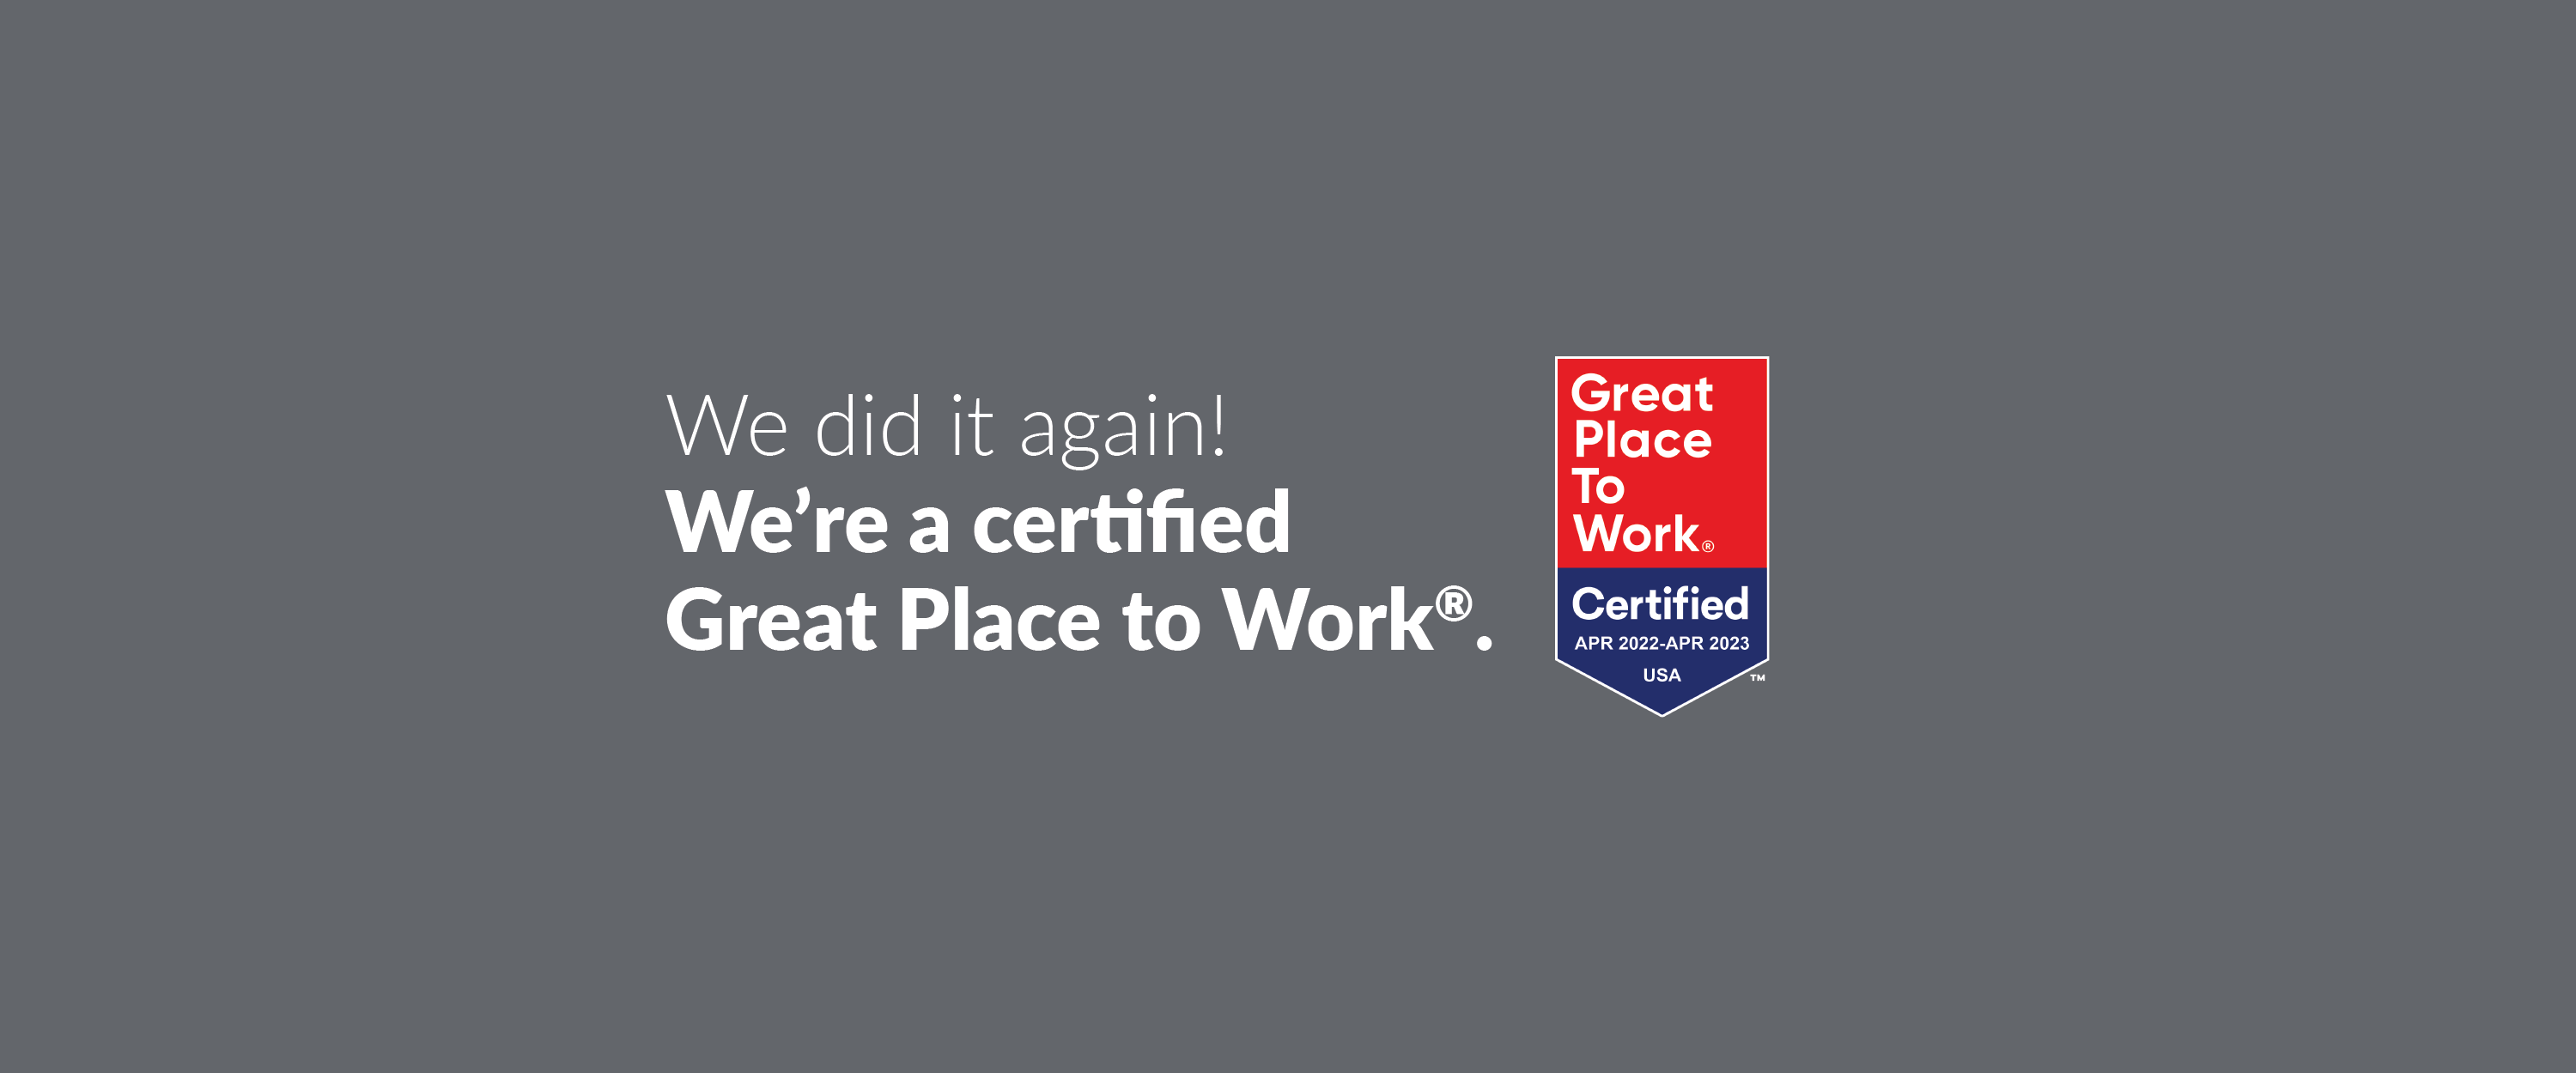 We're a Great Place to Work... AGAIN!